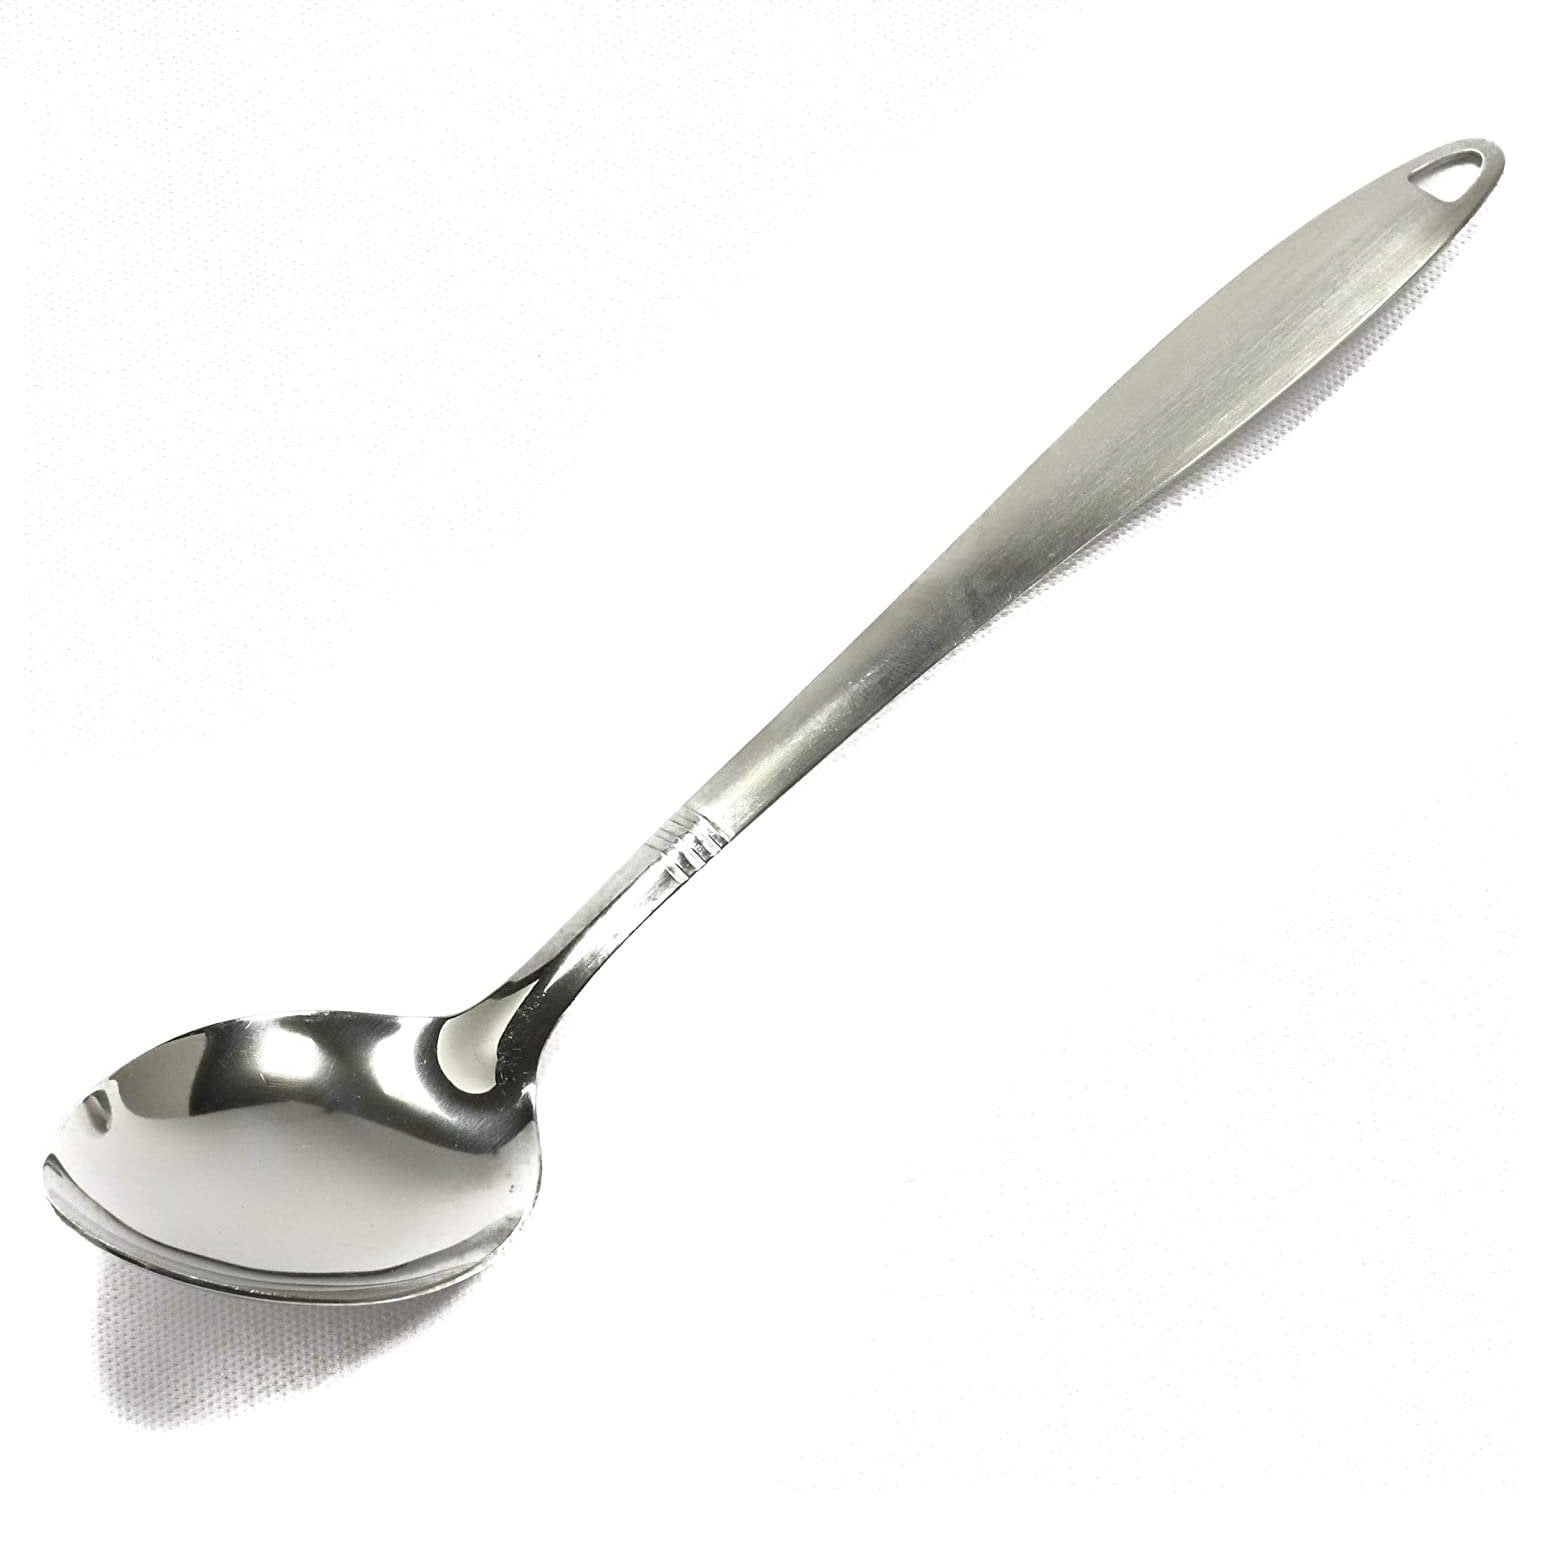 KitchenAid Premium Basting Spoon with Hang Hook, 13.3-inch, Stainless Steel